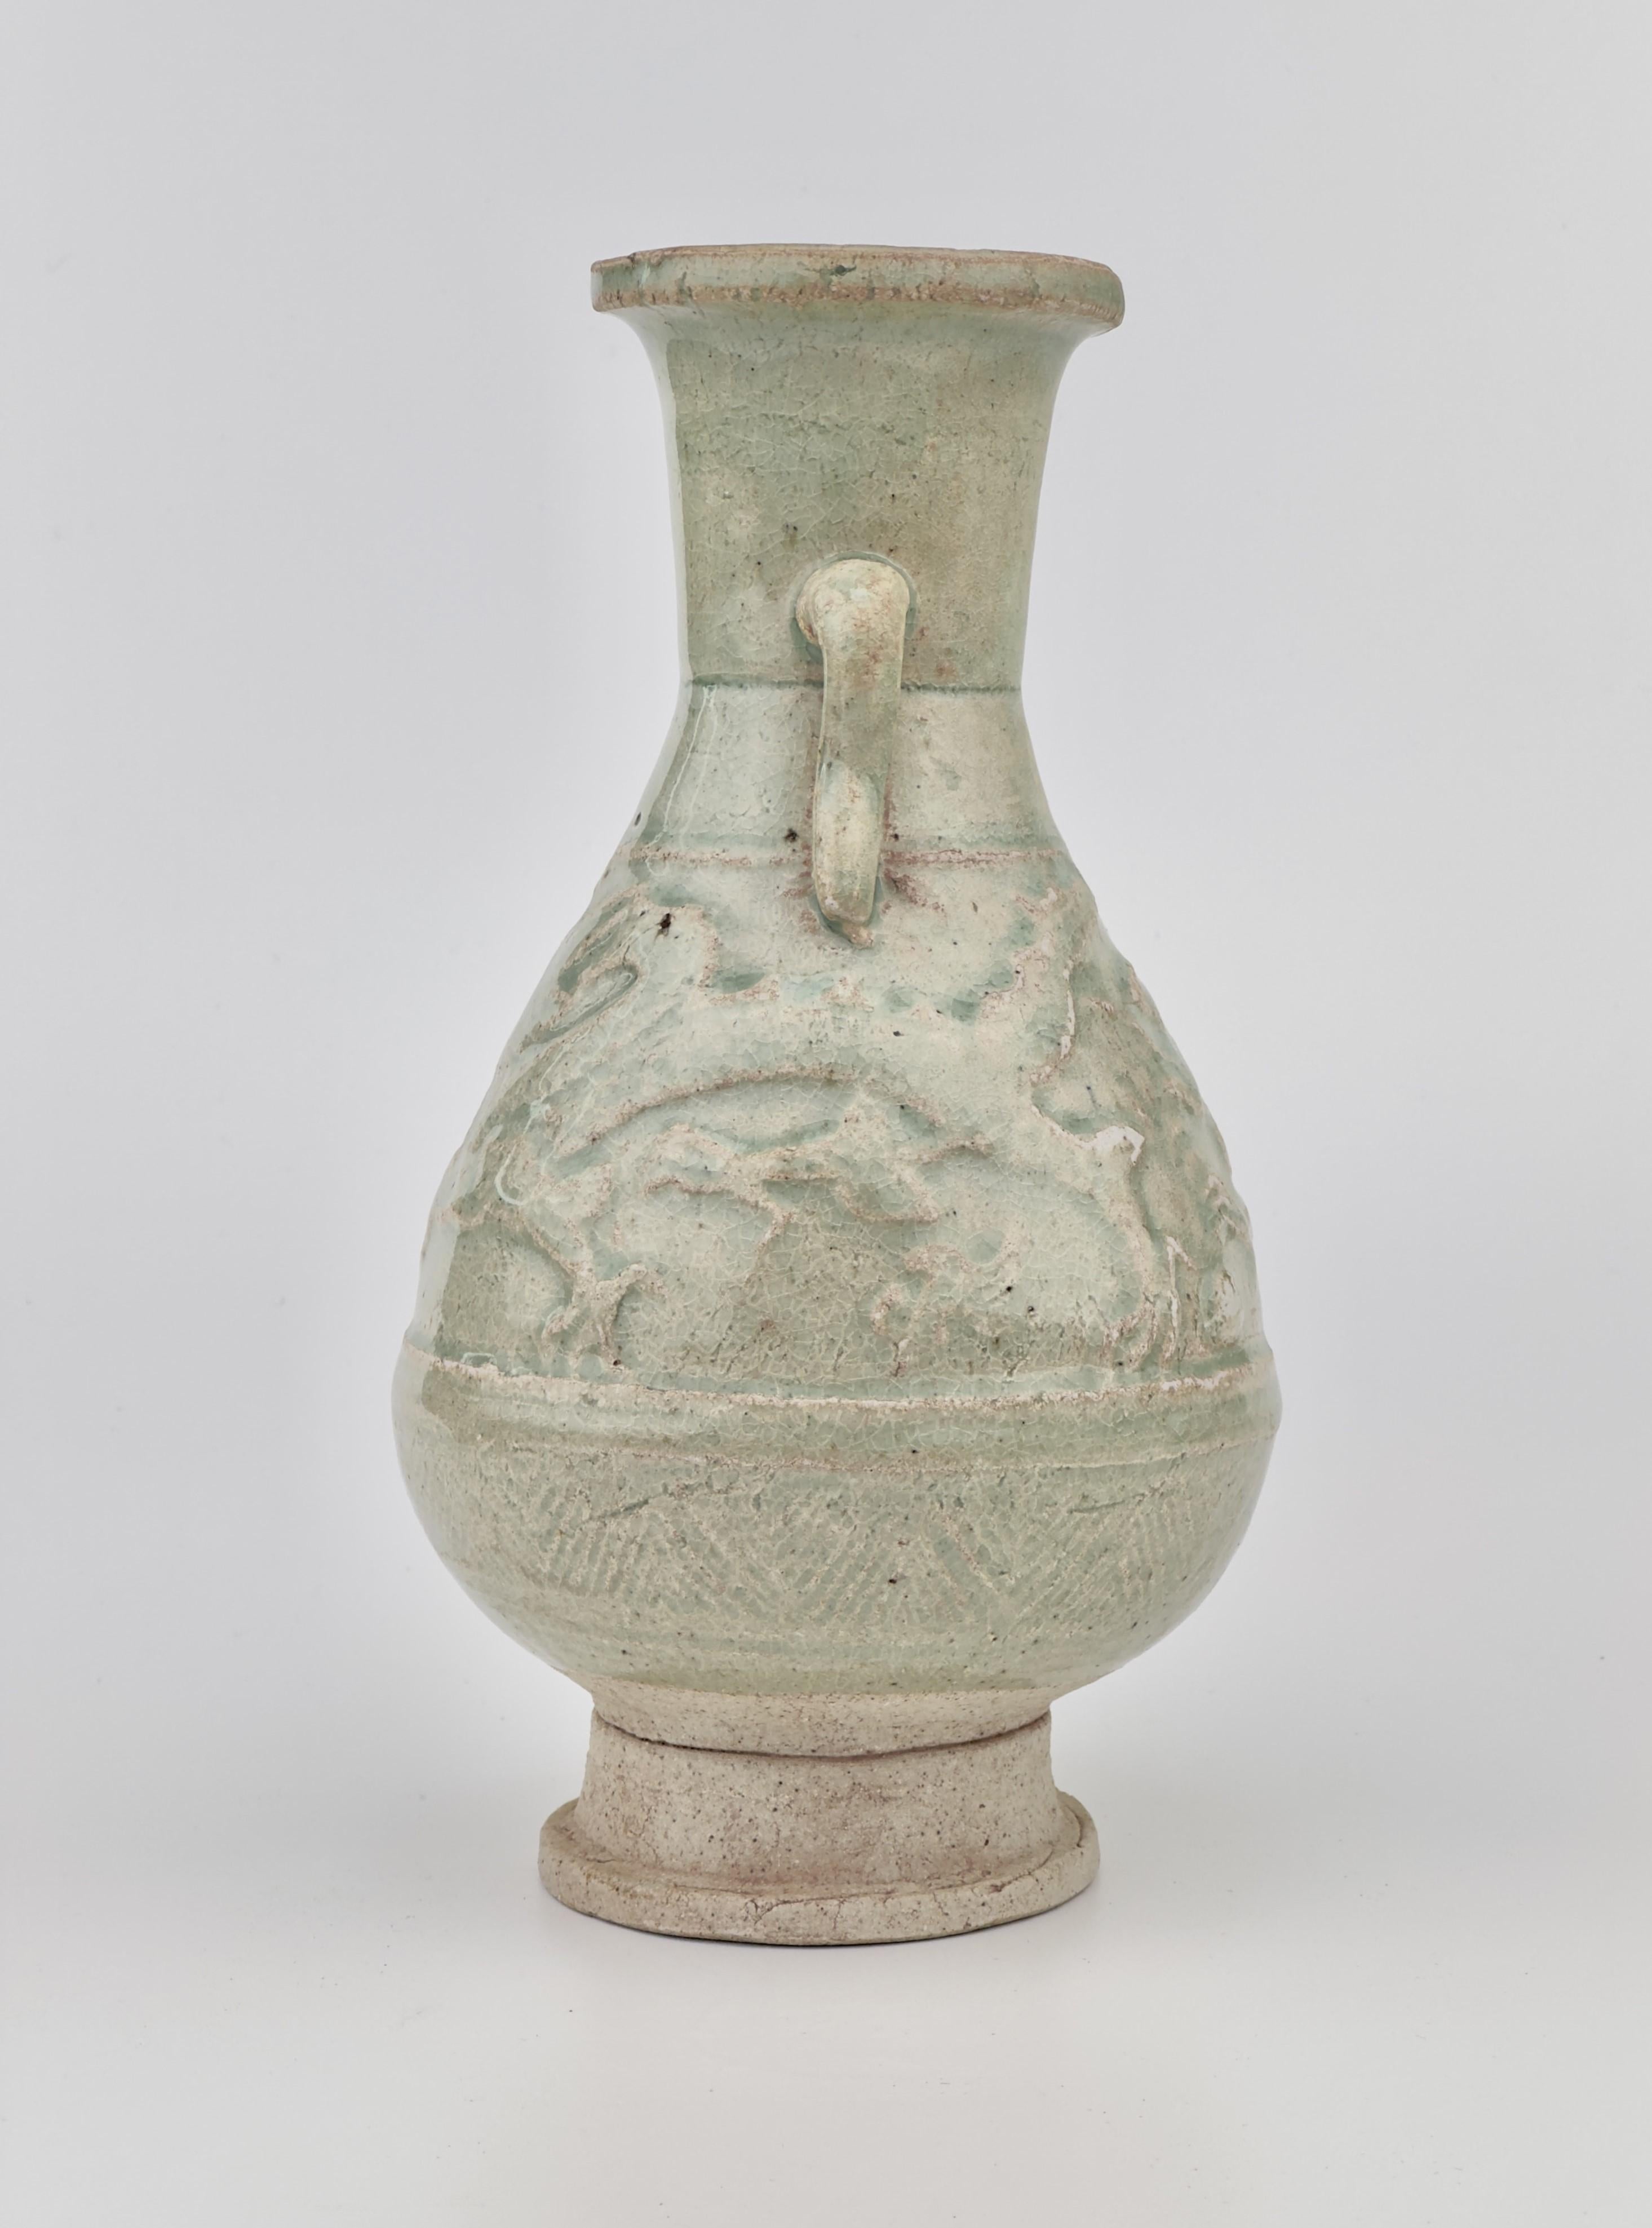 This vase is made from a type of low-fired, porous clay and features a crackled glaze. It bears resemblance to the renowned funerary vases and covers adorned with applied decorations.

Period : Yuan Dynasty(1271-1368)
Type : vase
Medium : Qingbai